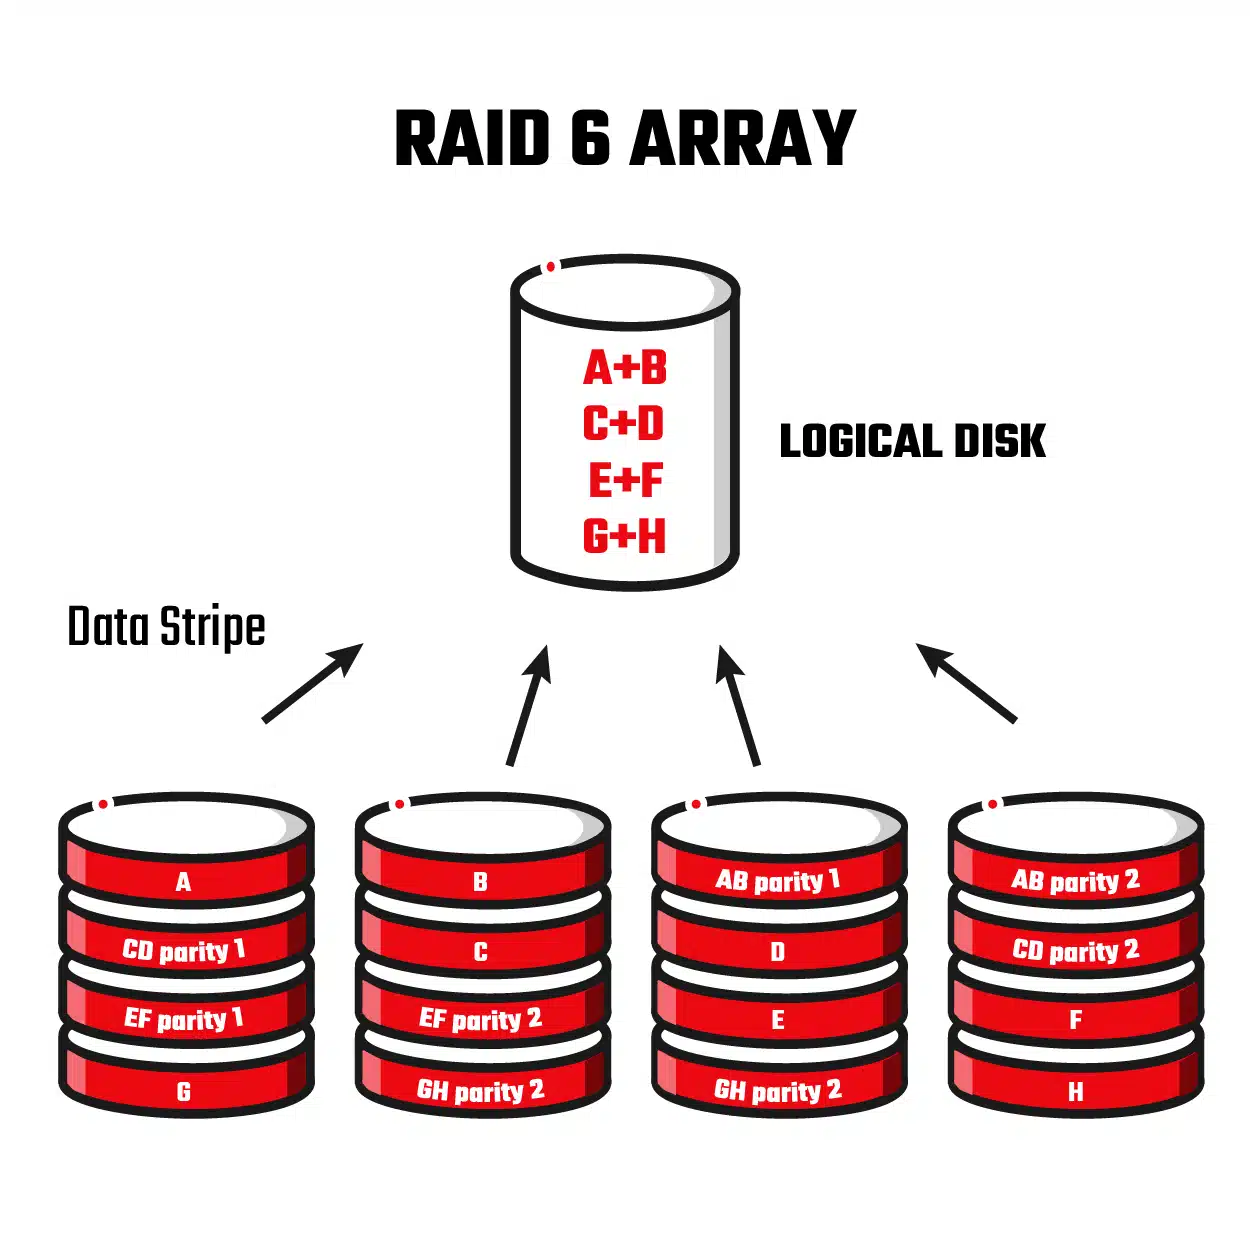 What is parity in raid? How parity works